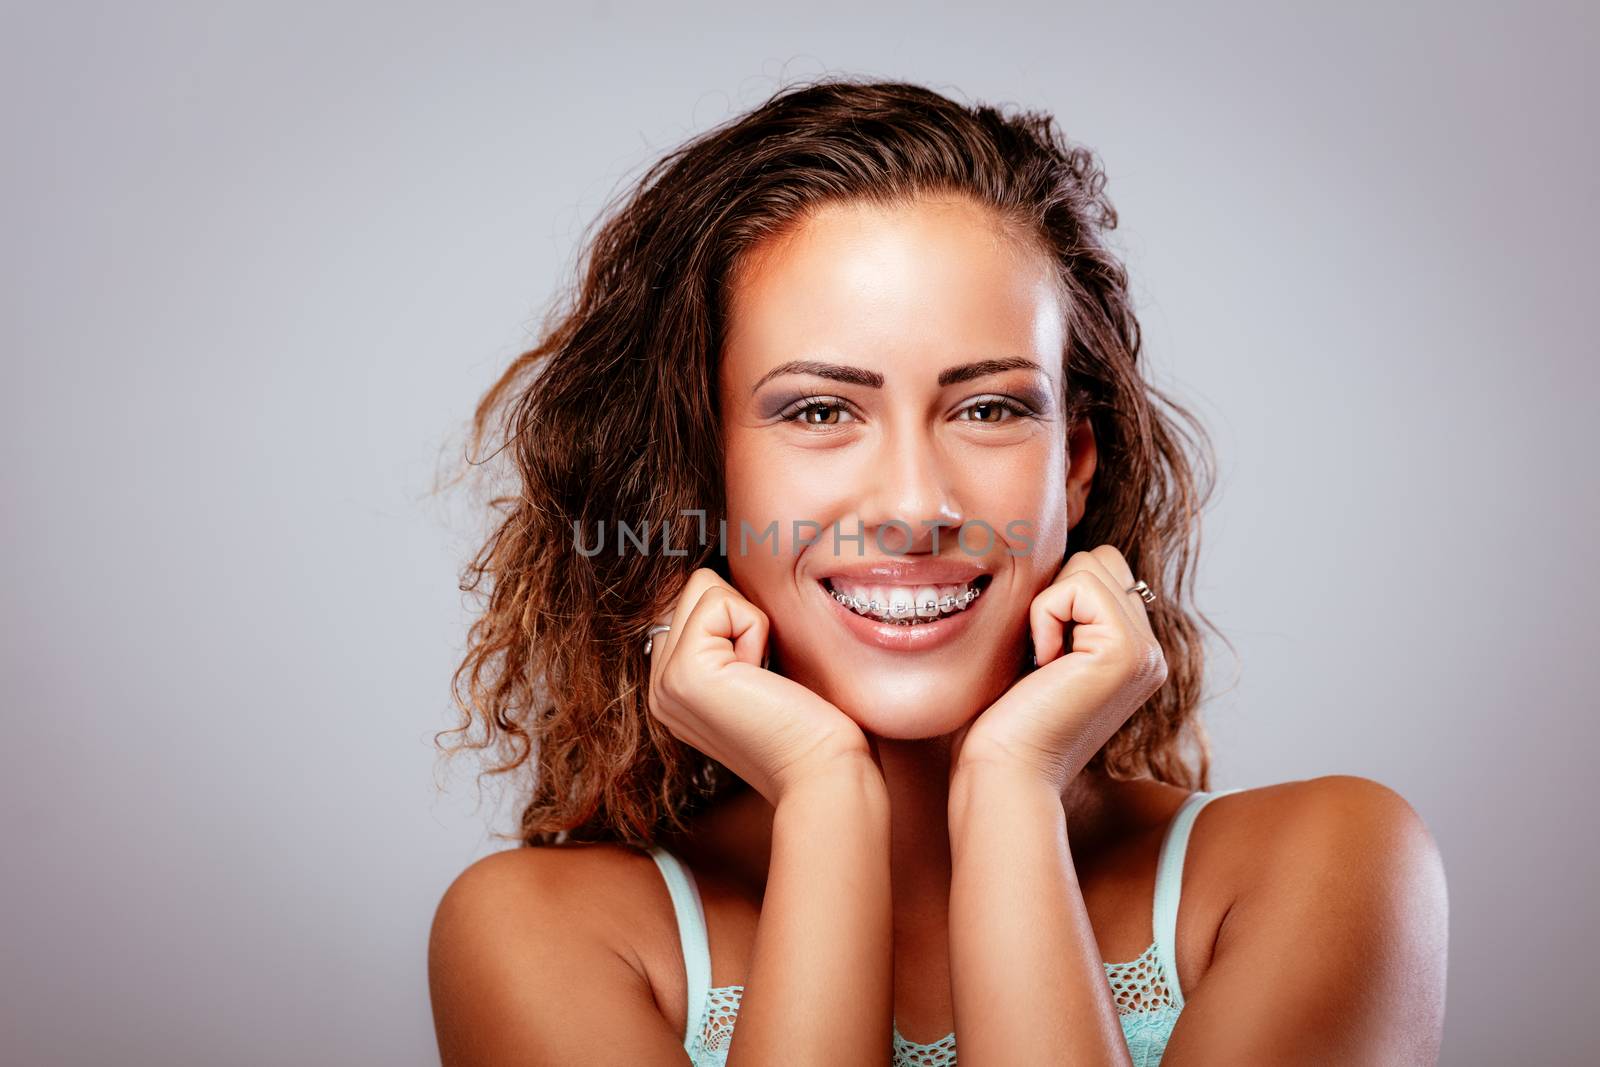 Portait of a smiling young woman showing her perfect white teeth with braces. Looking at camera.